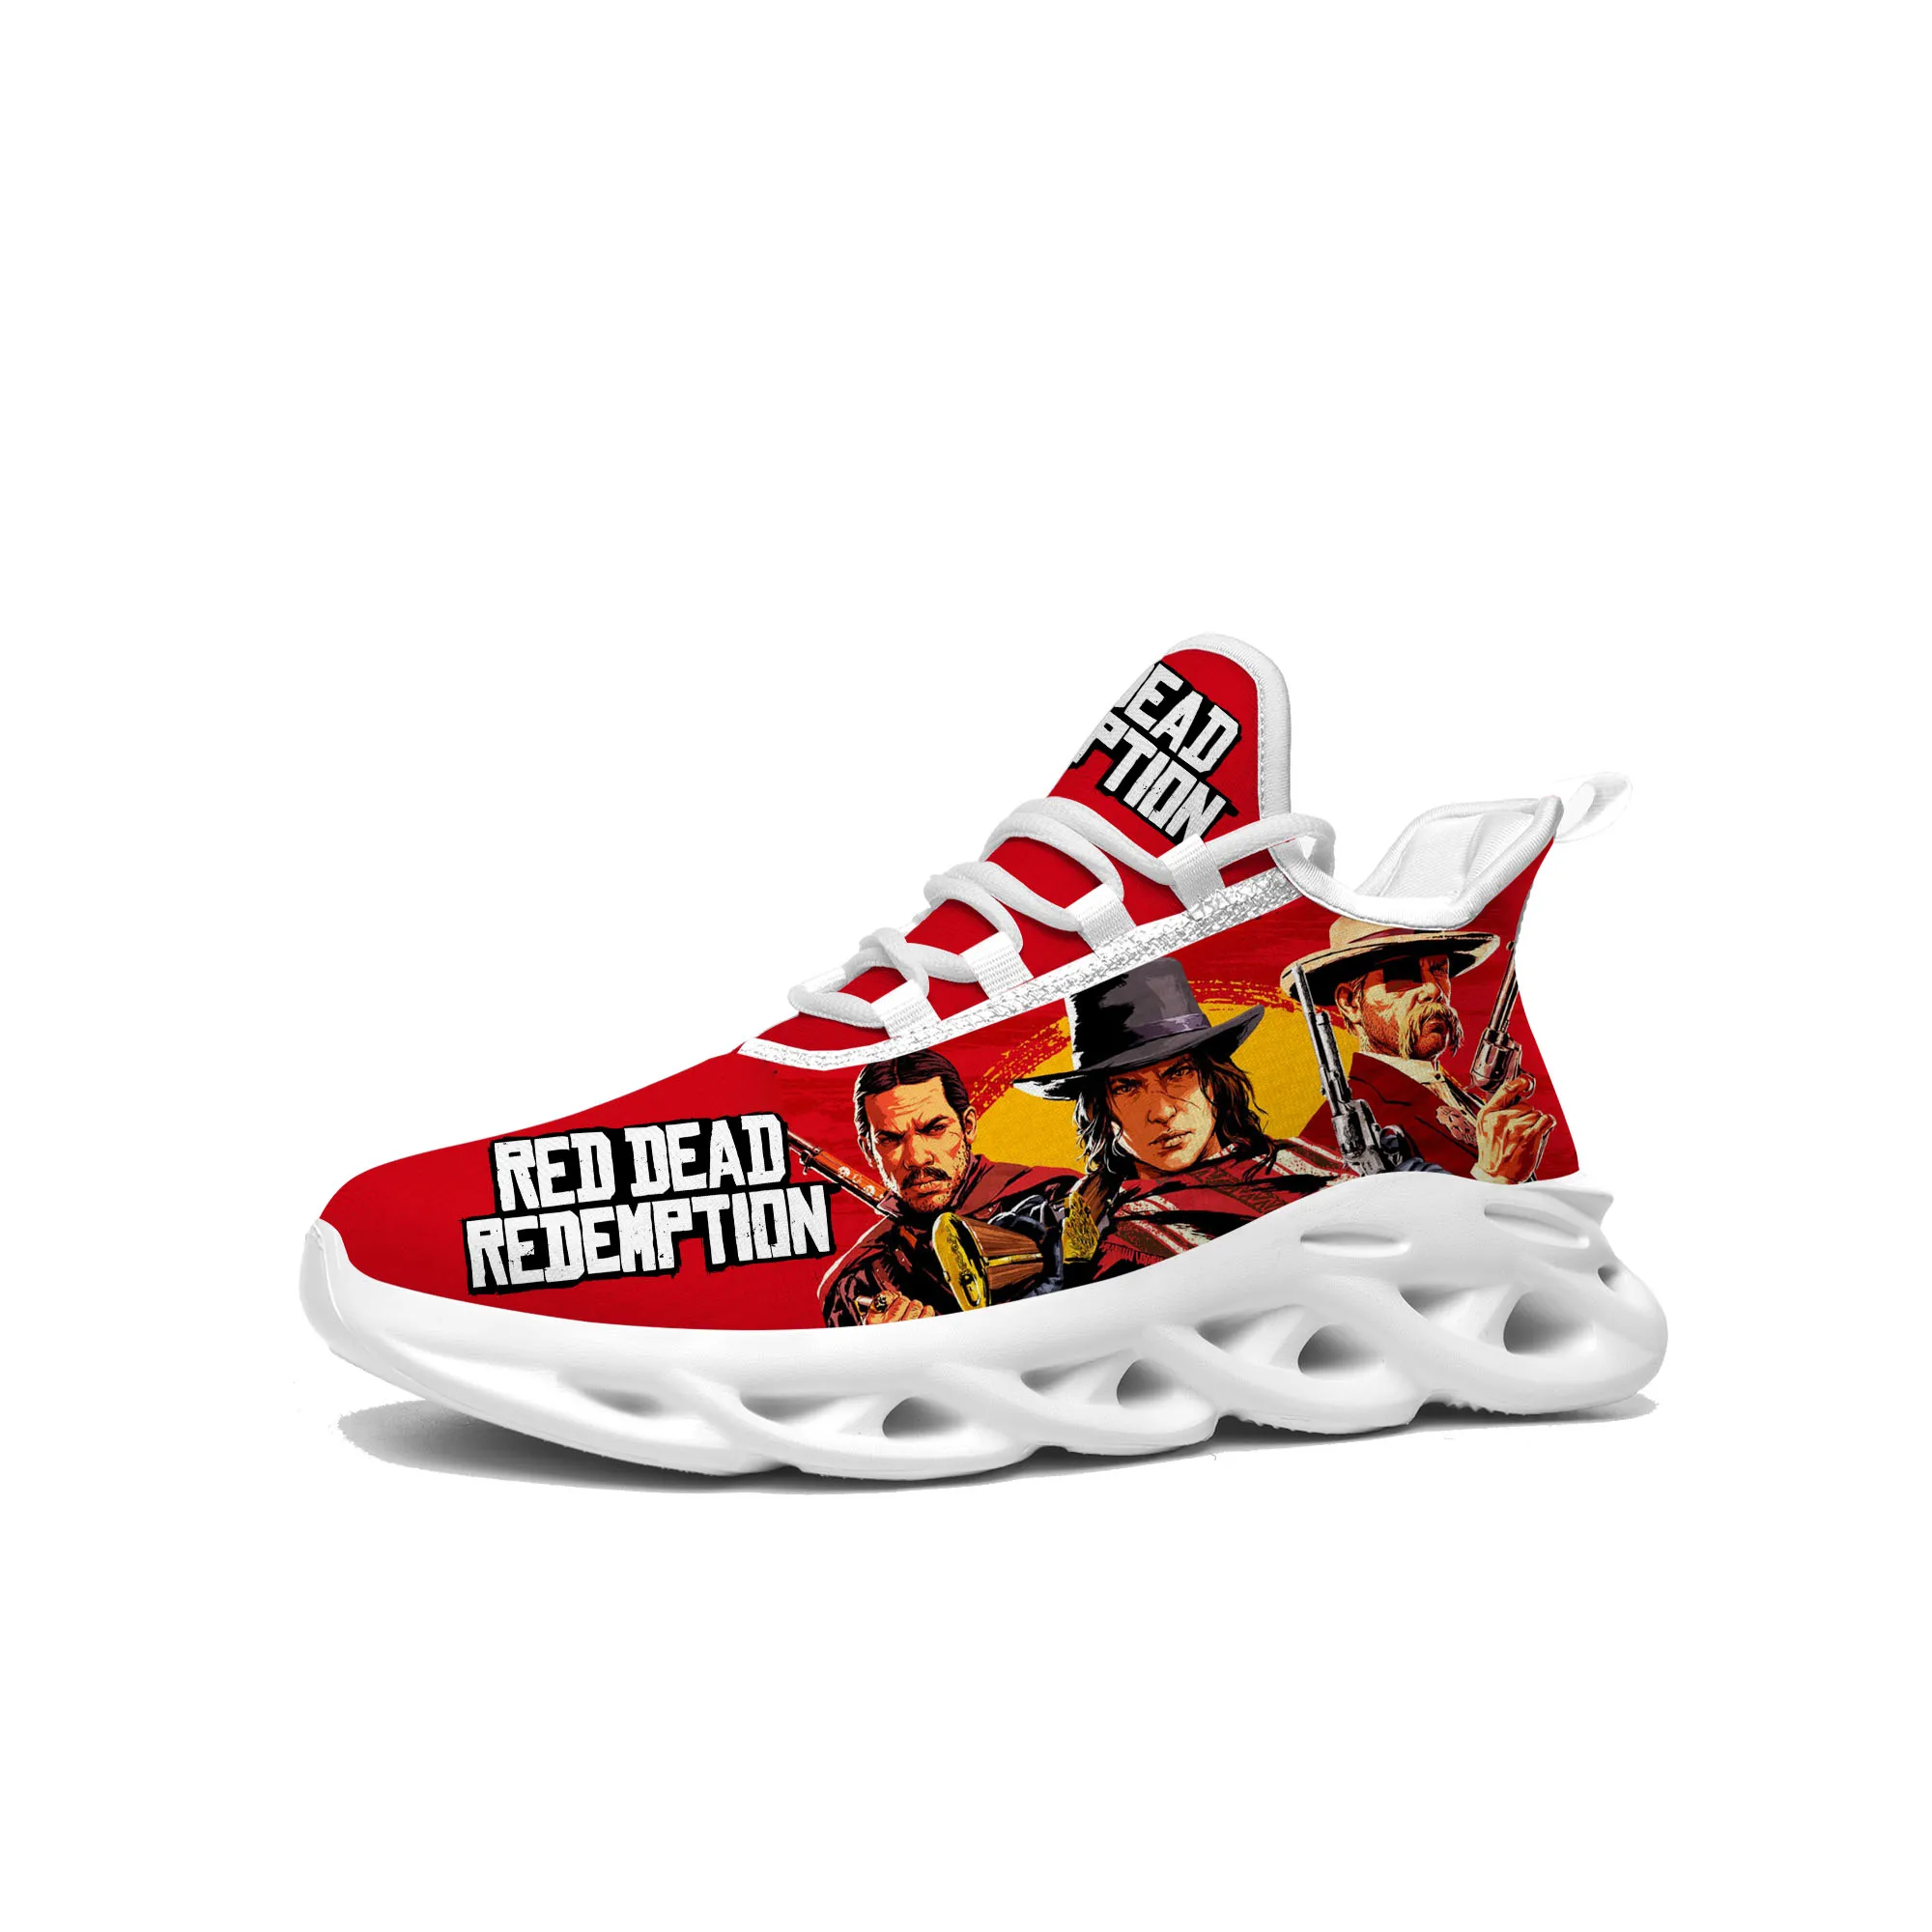 

Video Game Red Dead Redemption Flats Sneakers Mens Womens Teenager Sports Running Shoes High Quality Custom Built Lace Up Shoe